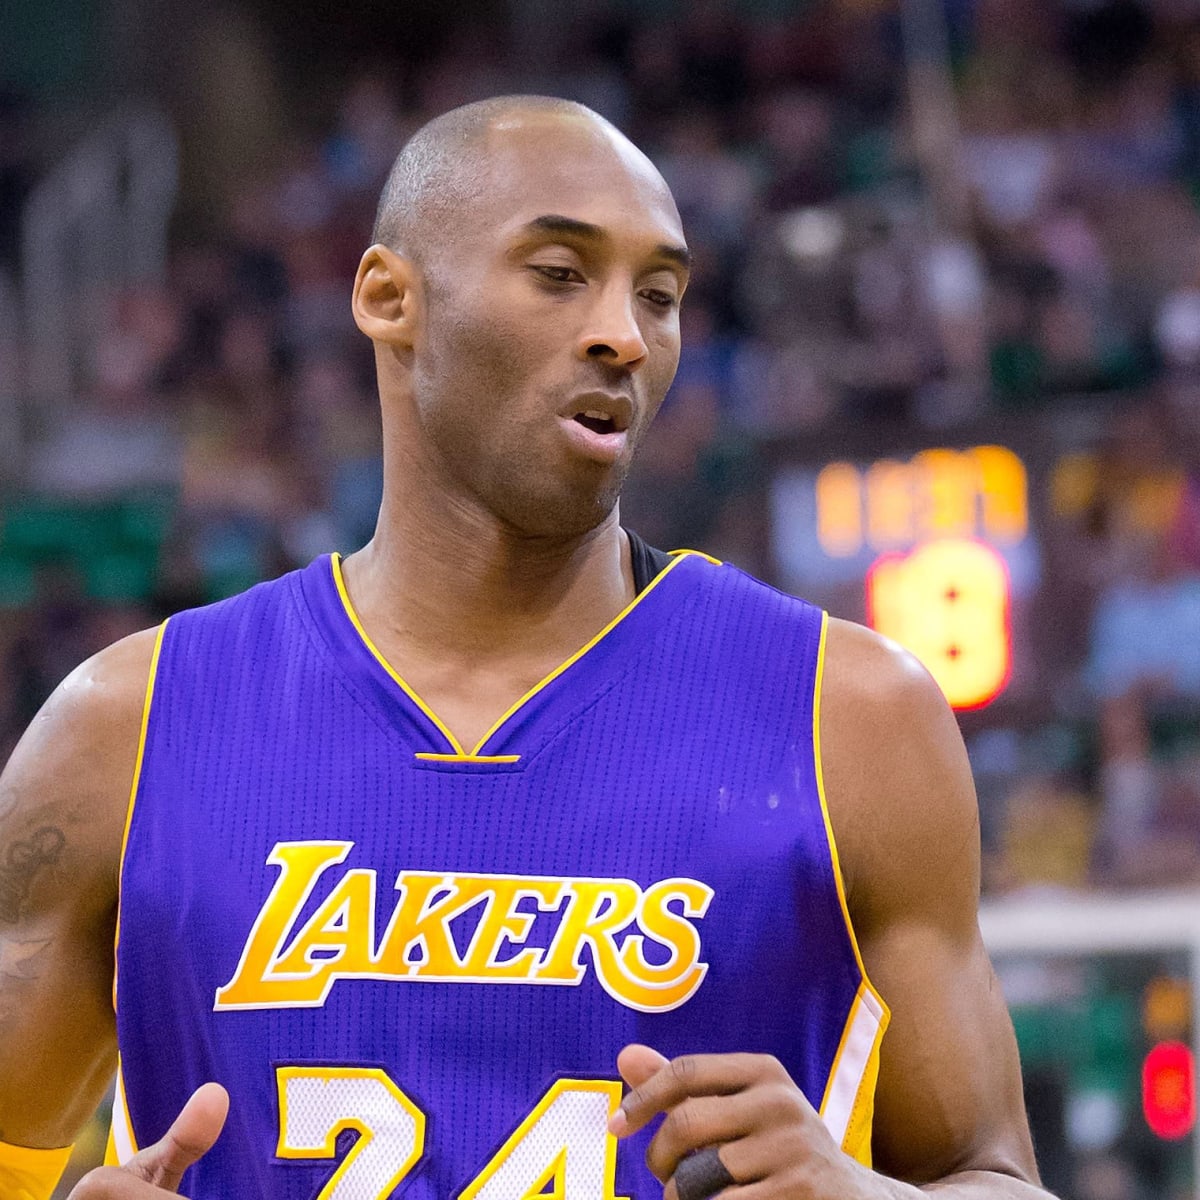 Kobe Bryant mint condition rookie card sells for nearly $1.8 million at  auction 